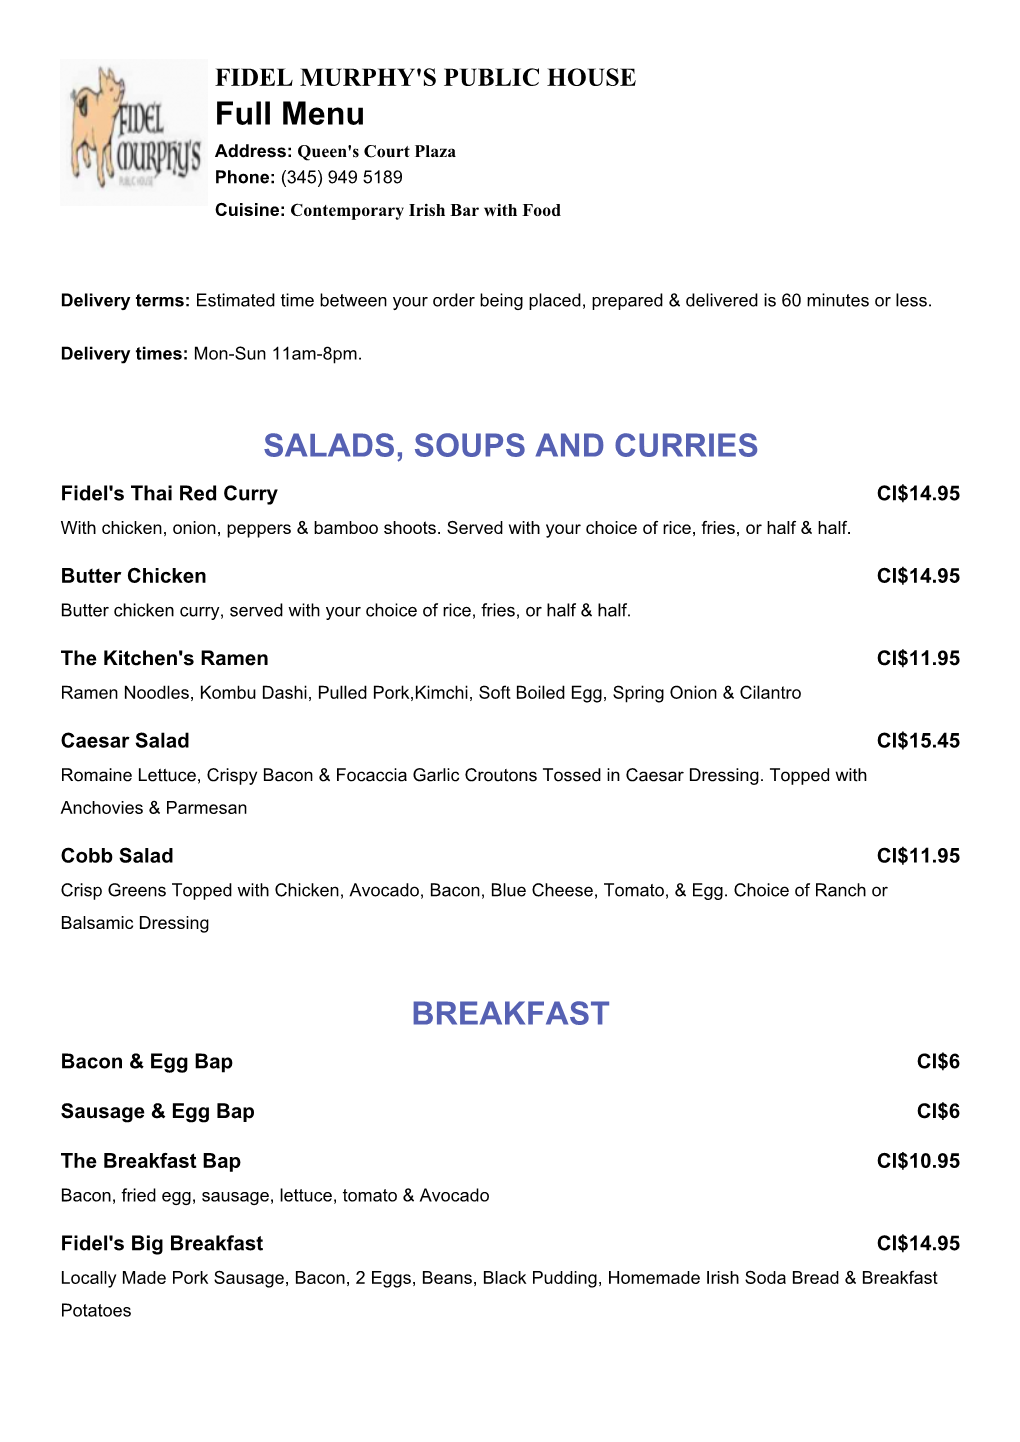 Full Menu SALADS, SOUPS and CURRIES BREAKFAST